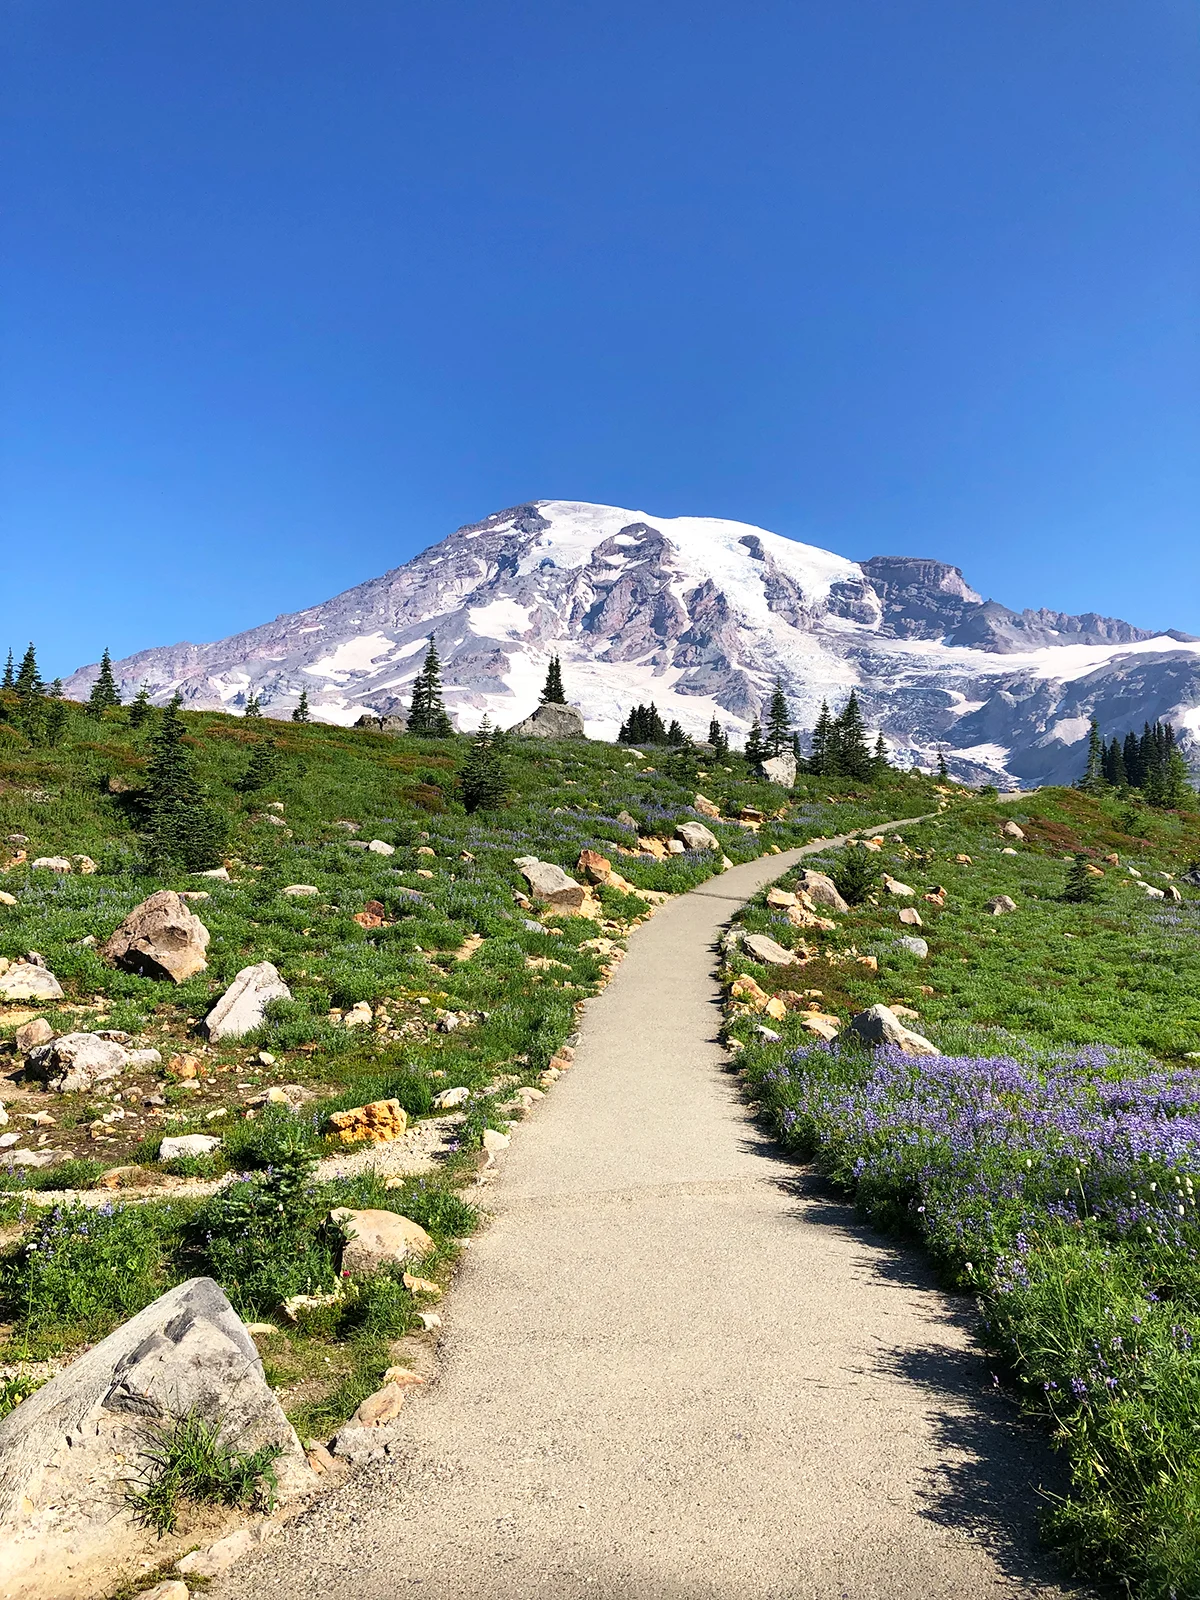 things to do in mt rainier hike up skyline trail with paved path wildflowers and mountain in distance